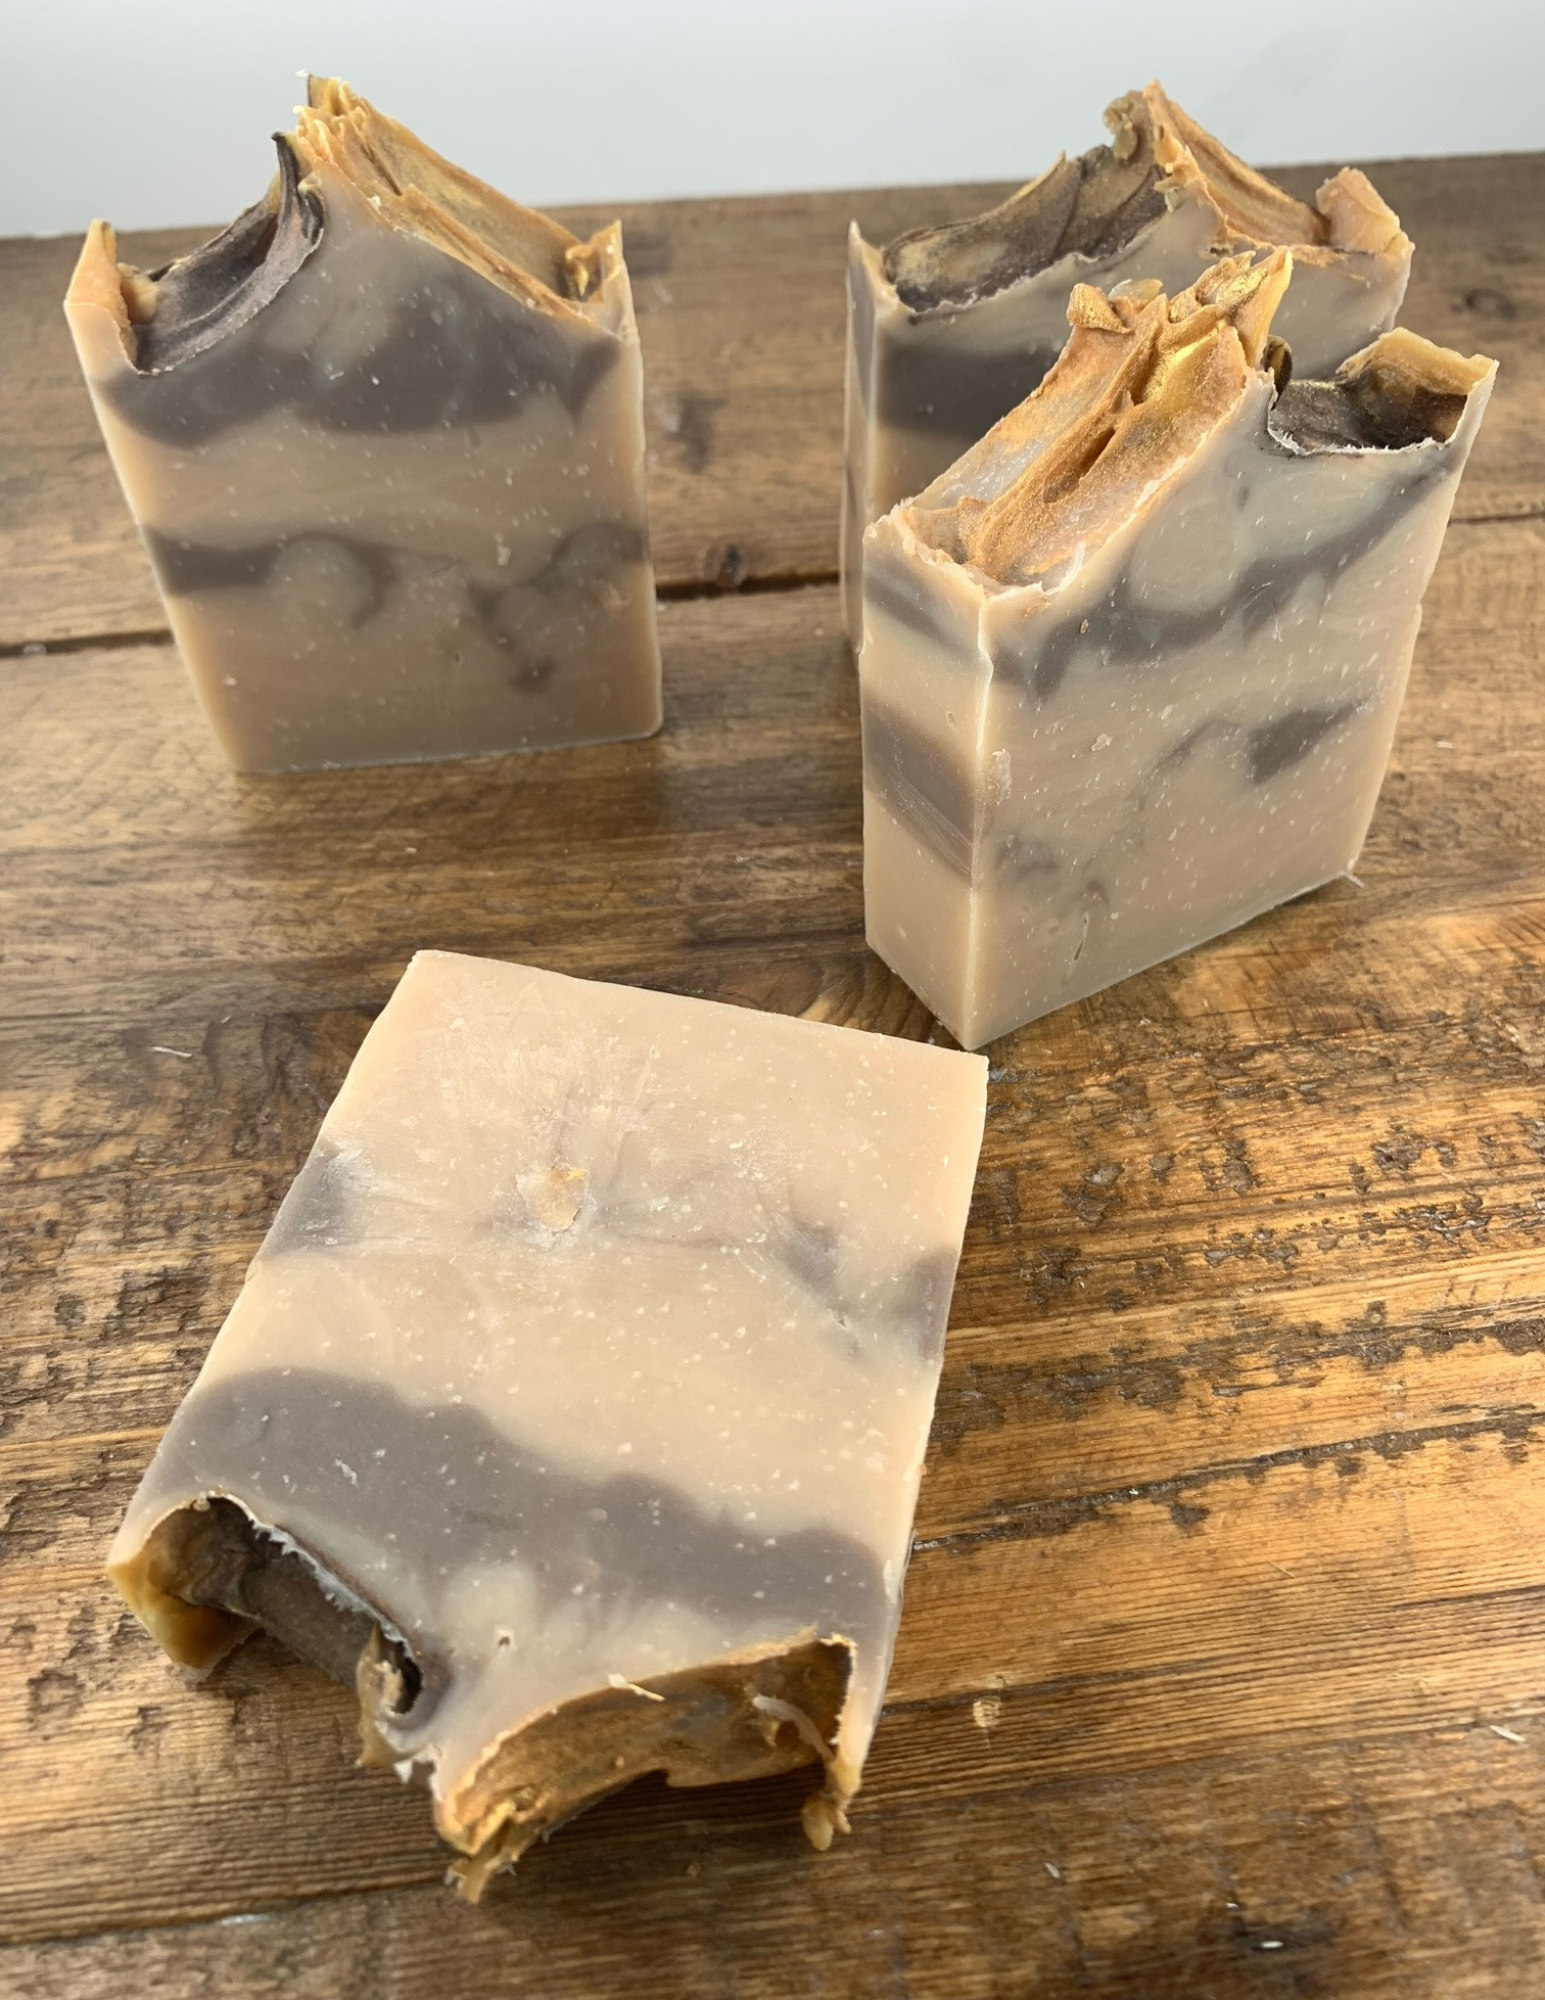 A brown swirled soap with a golden top sits on a wooden table. This cashmere scented soap is delightful with a warm and soft scent.